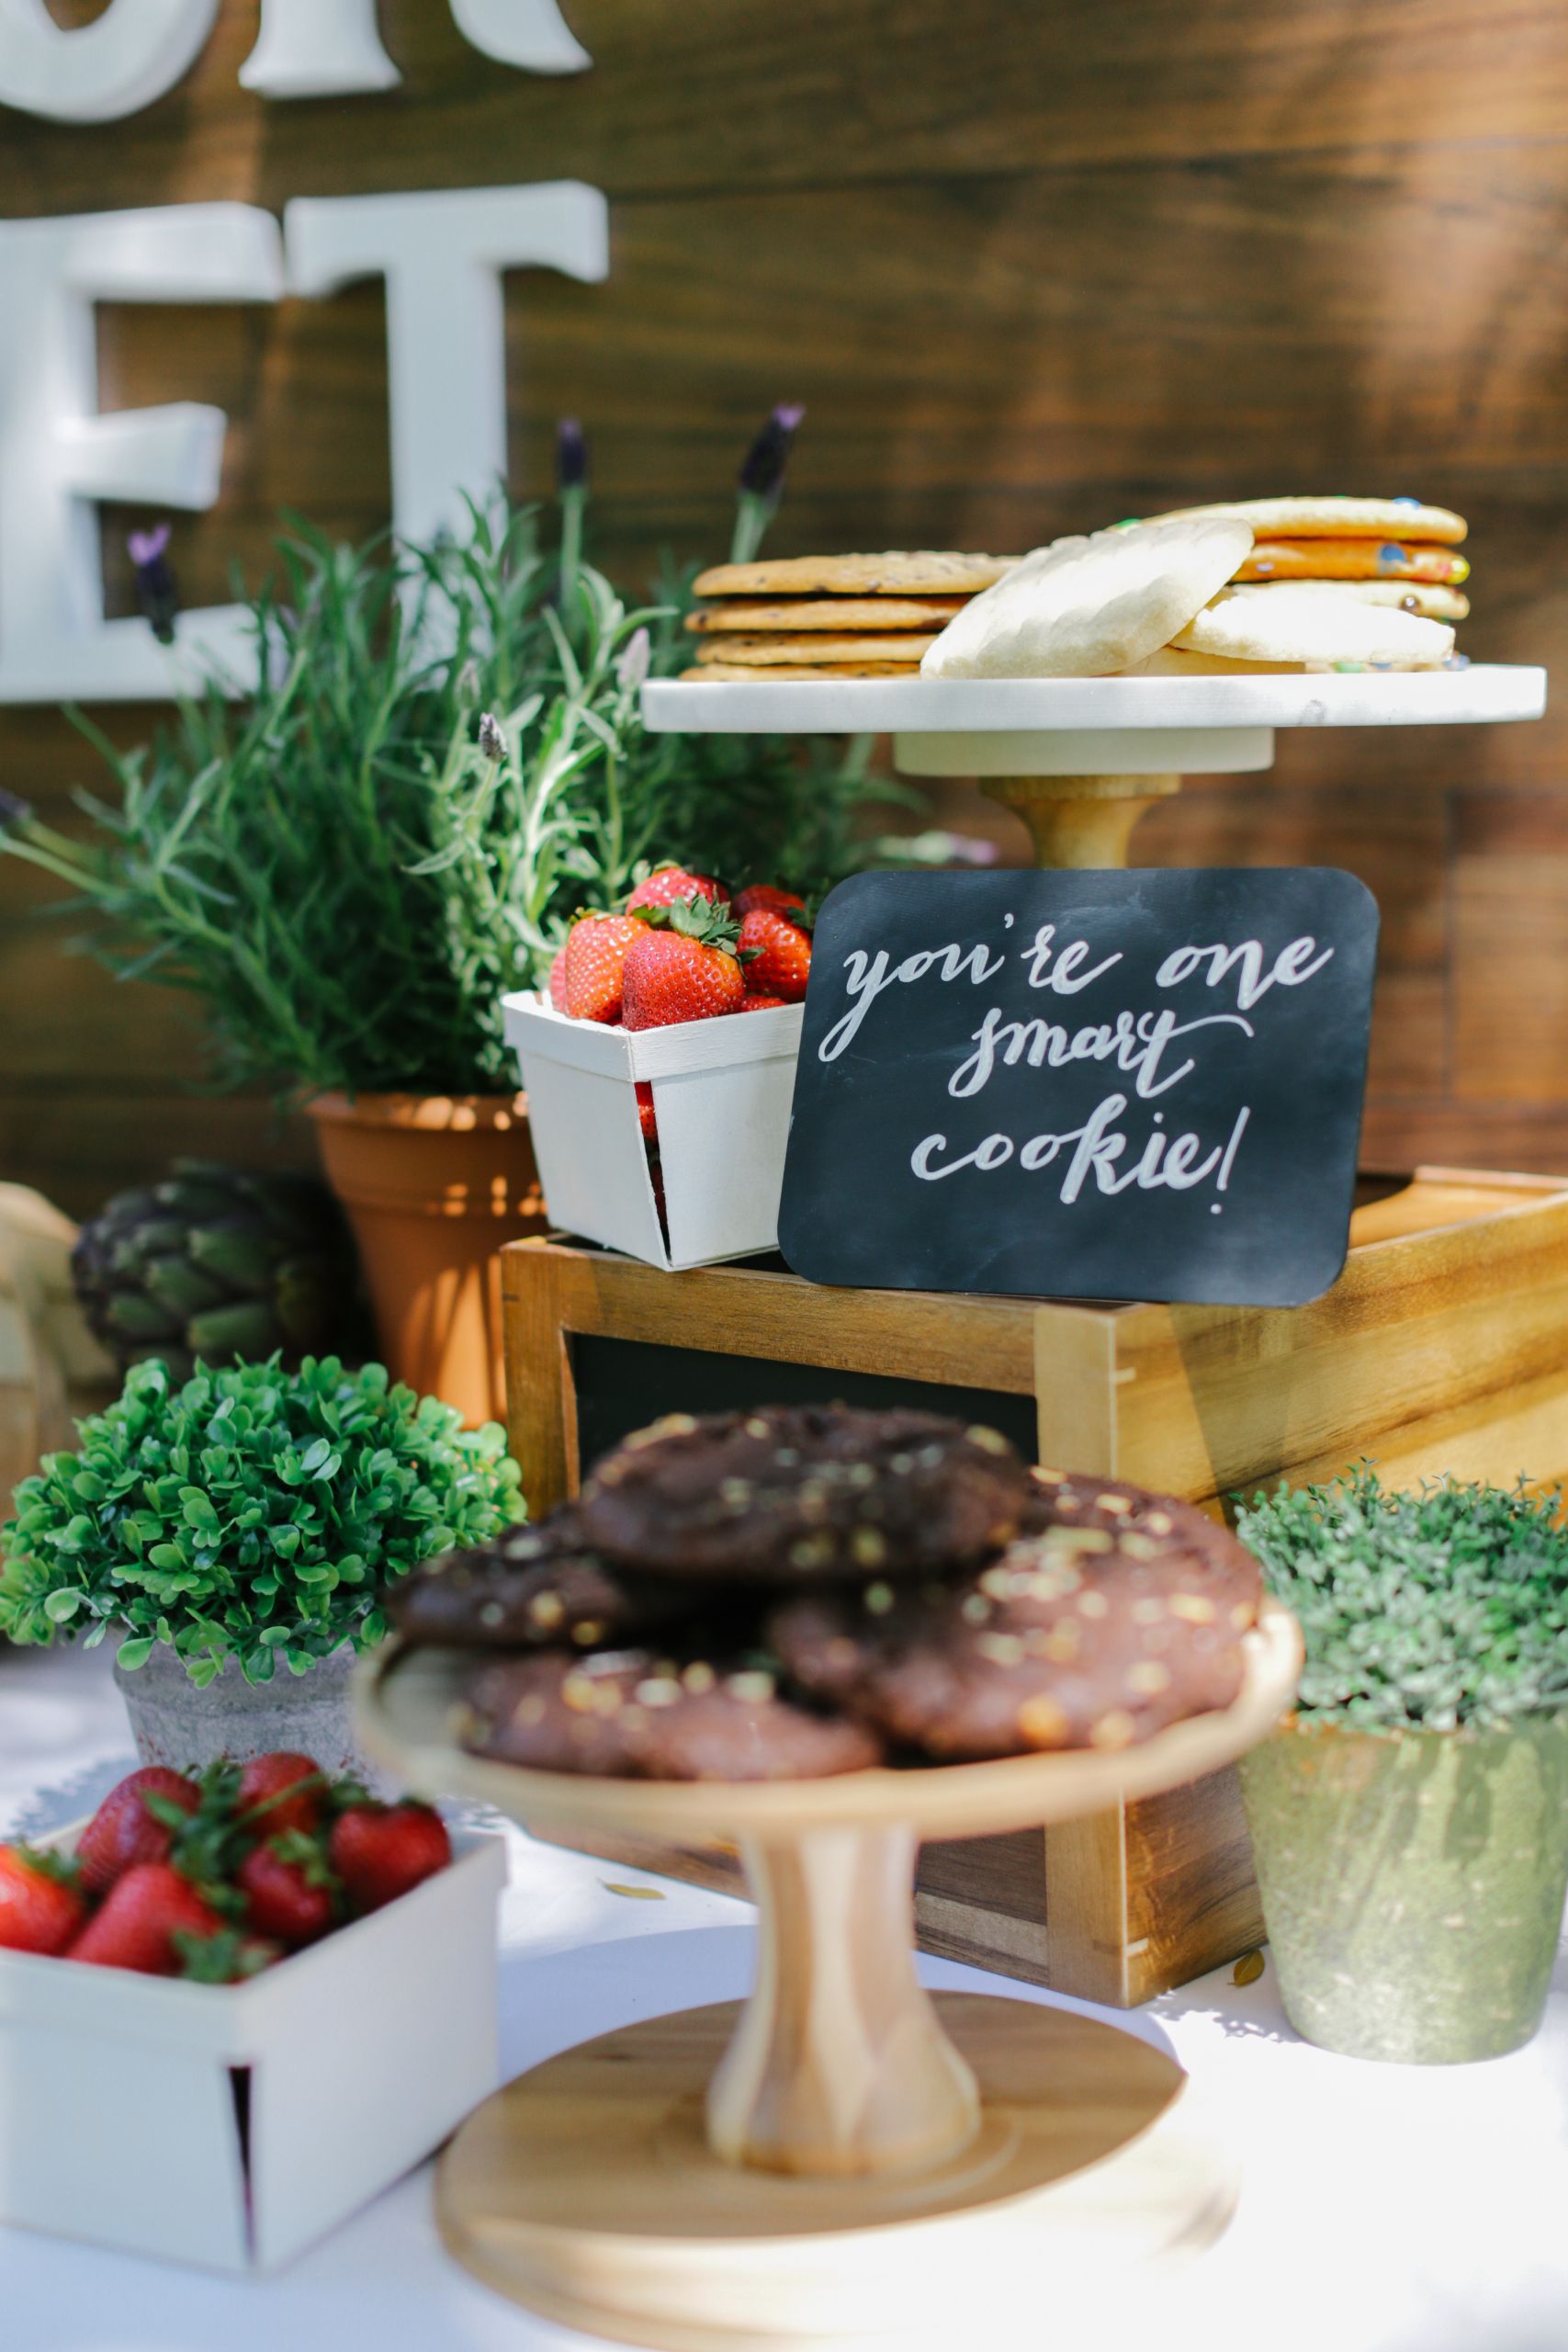 Graduation Party Catering Ideas
 party The World is Your Market Graduation Party Ideas